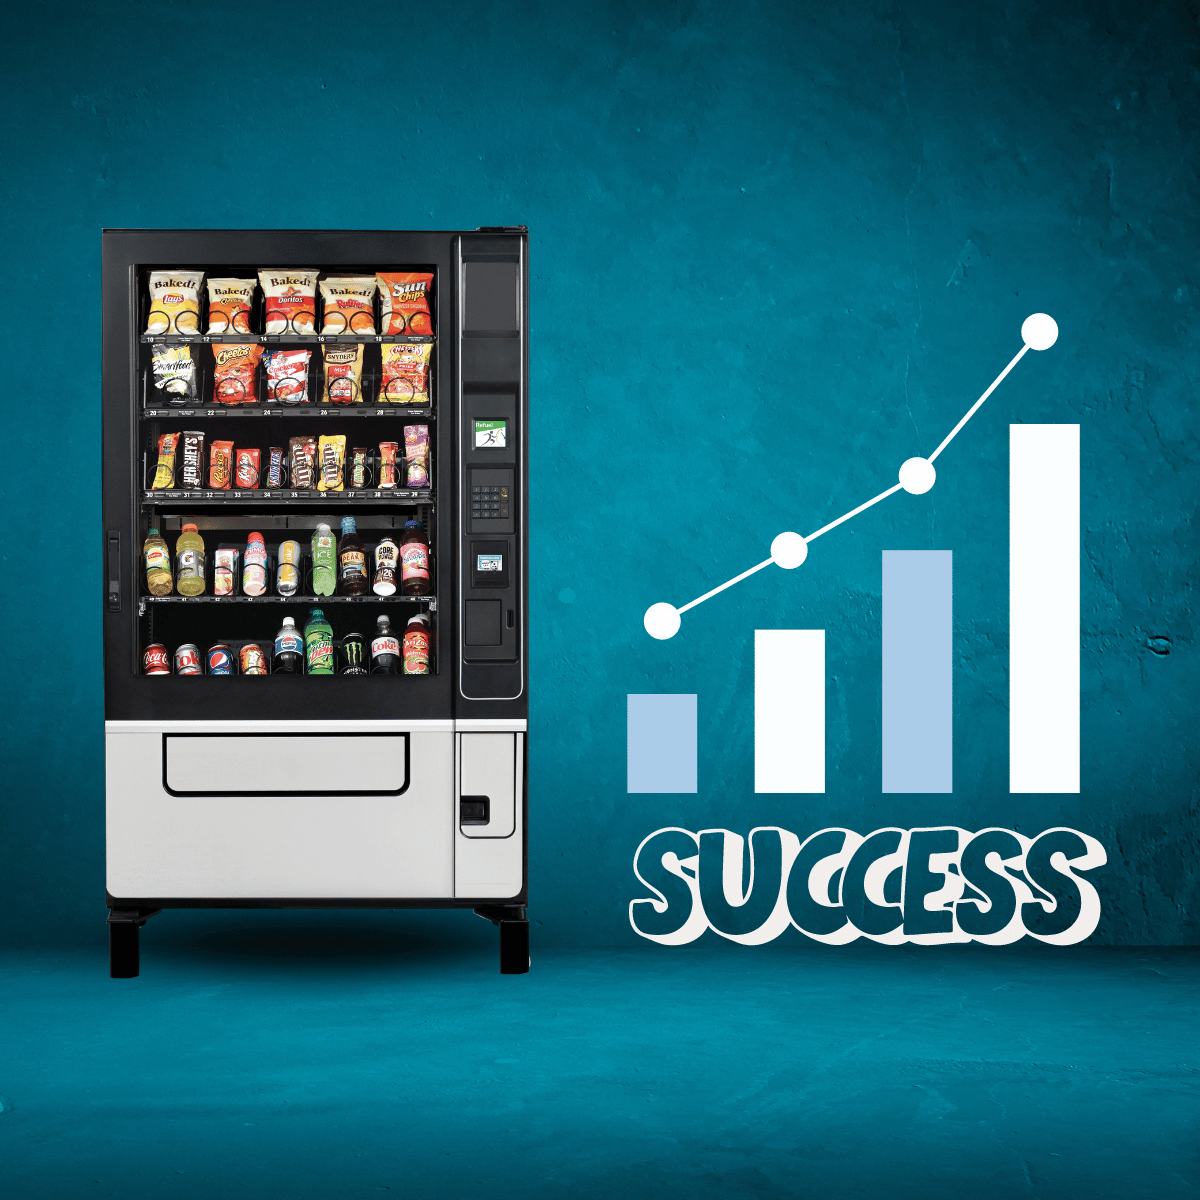 SUCCESSFUL VENDING TAKES MORE THAN JUST NUMBERS